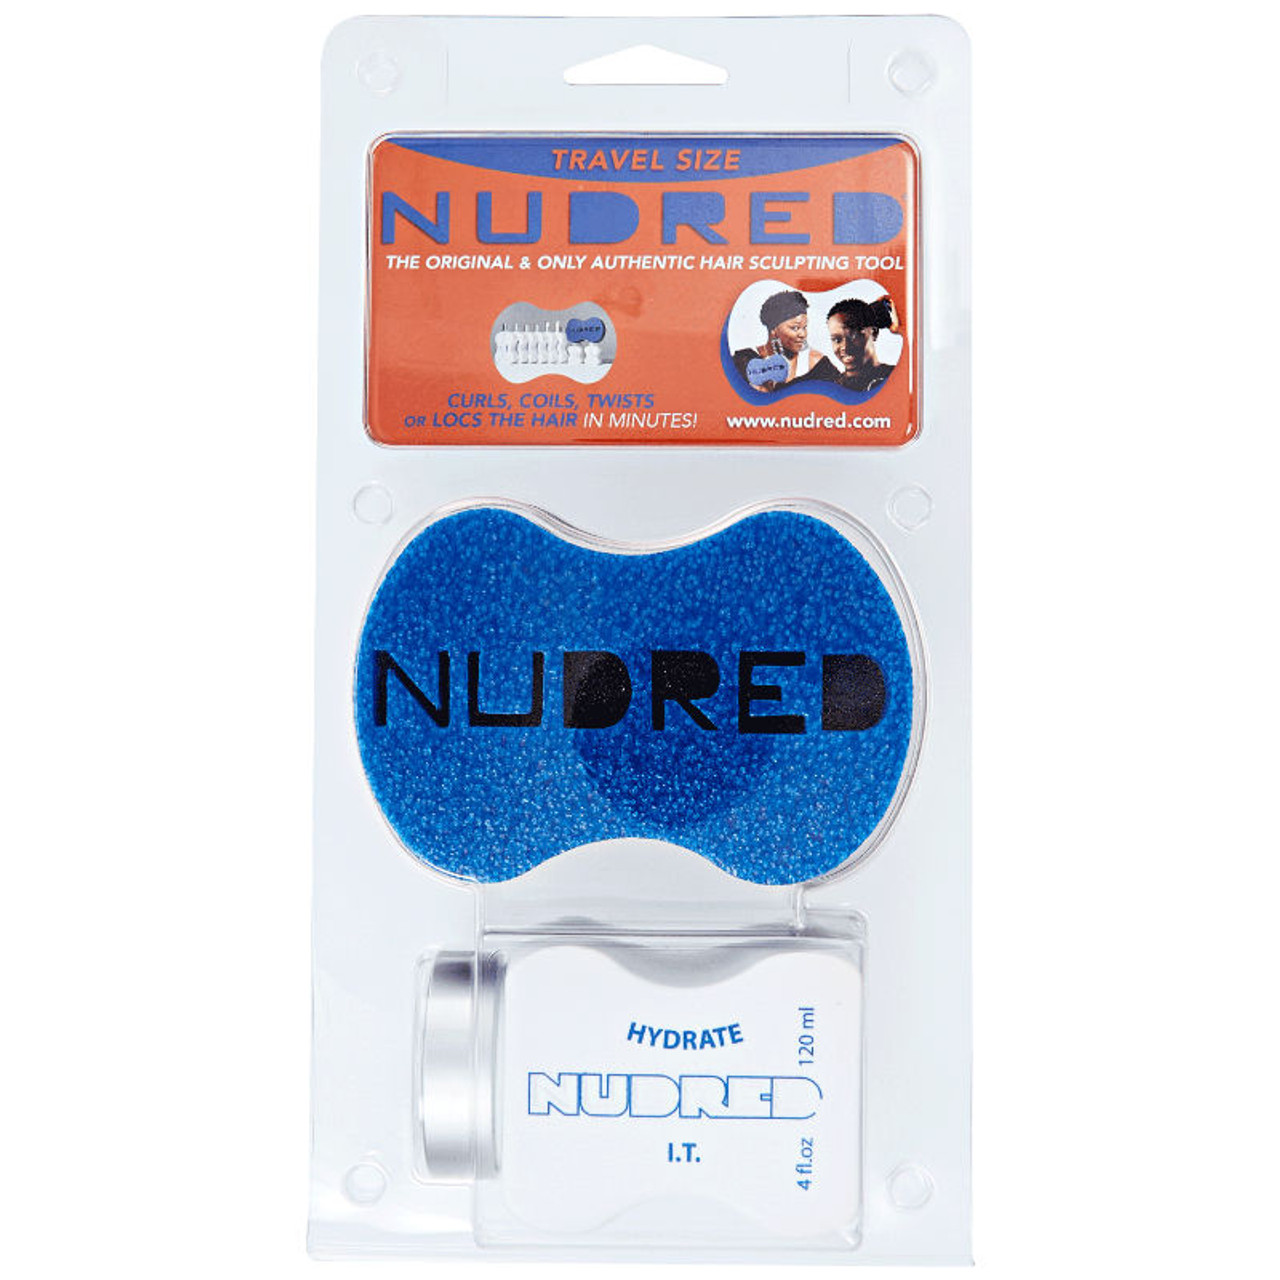 NuDred Hydrate I.T. Bottle for Dreads, Dreadlock Hair Products